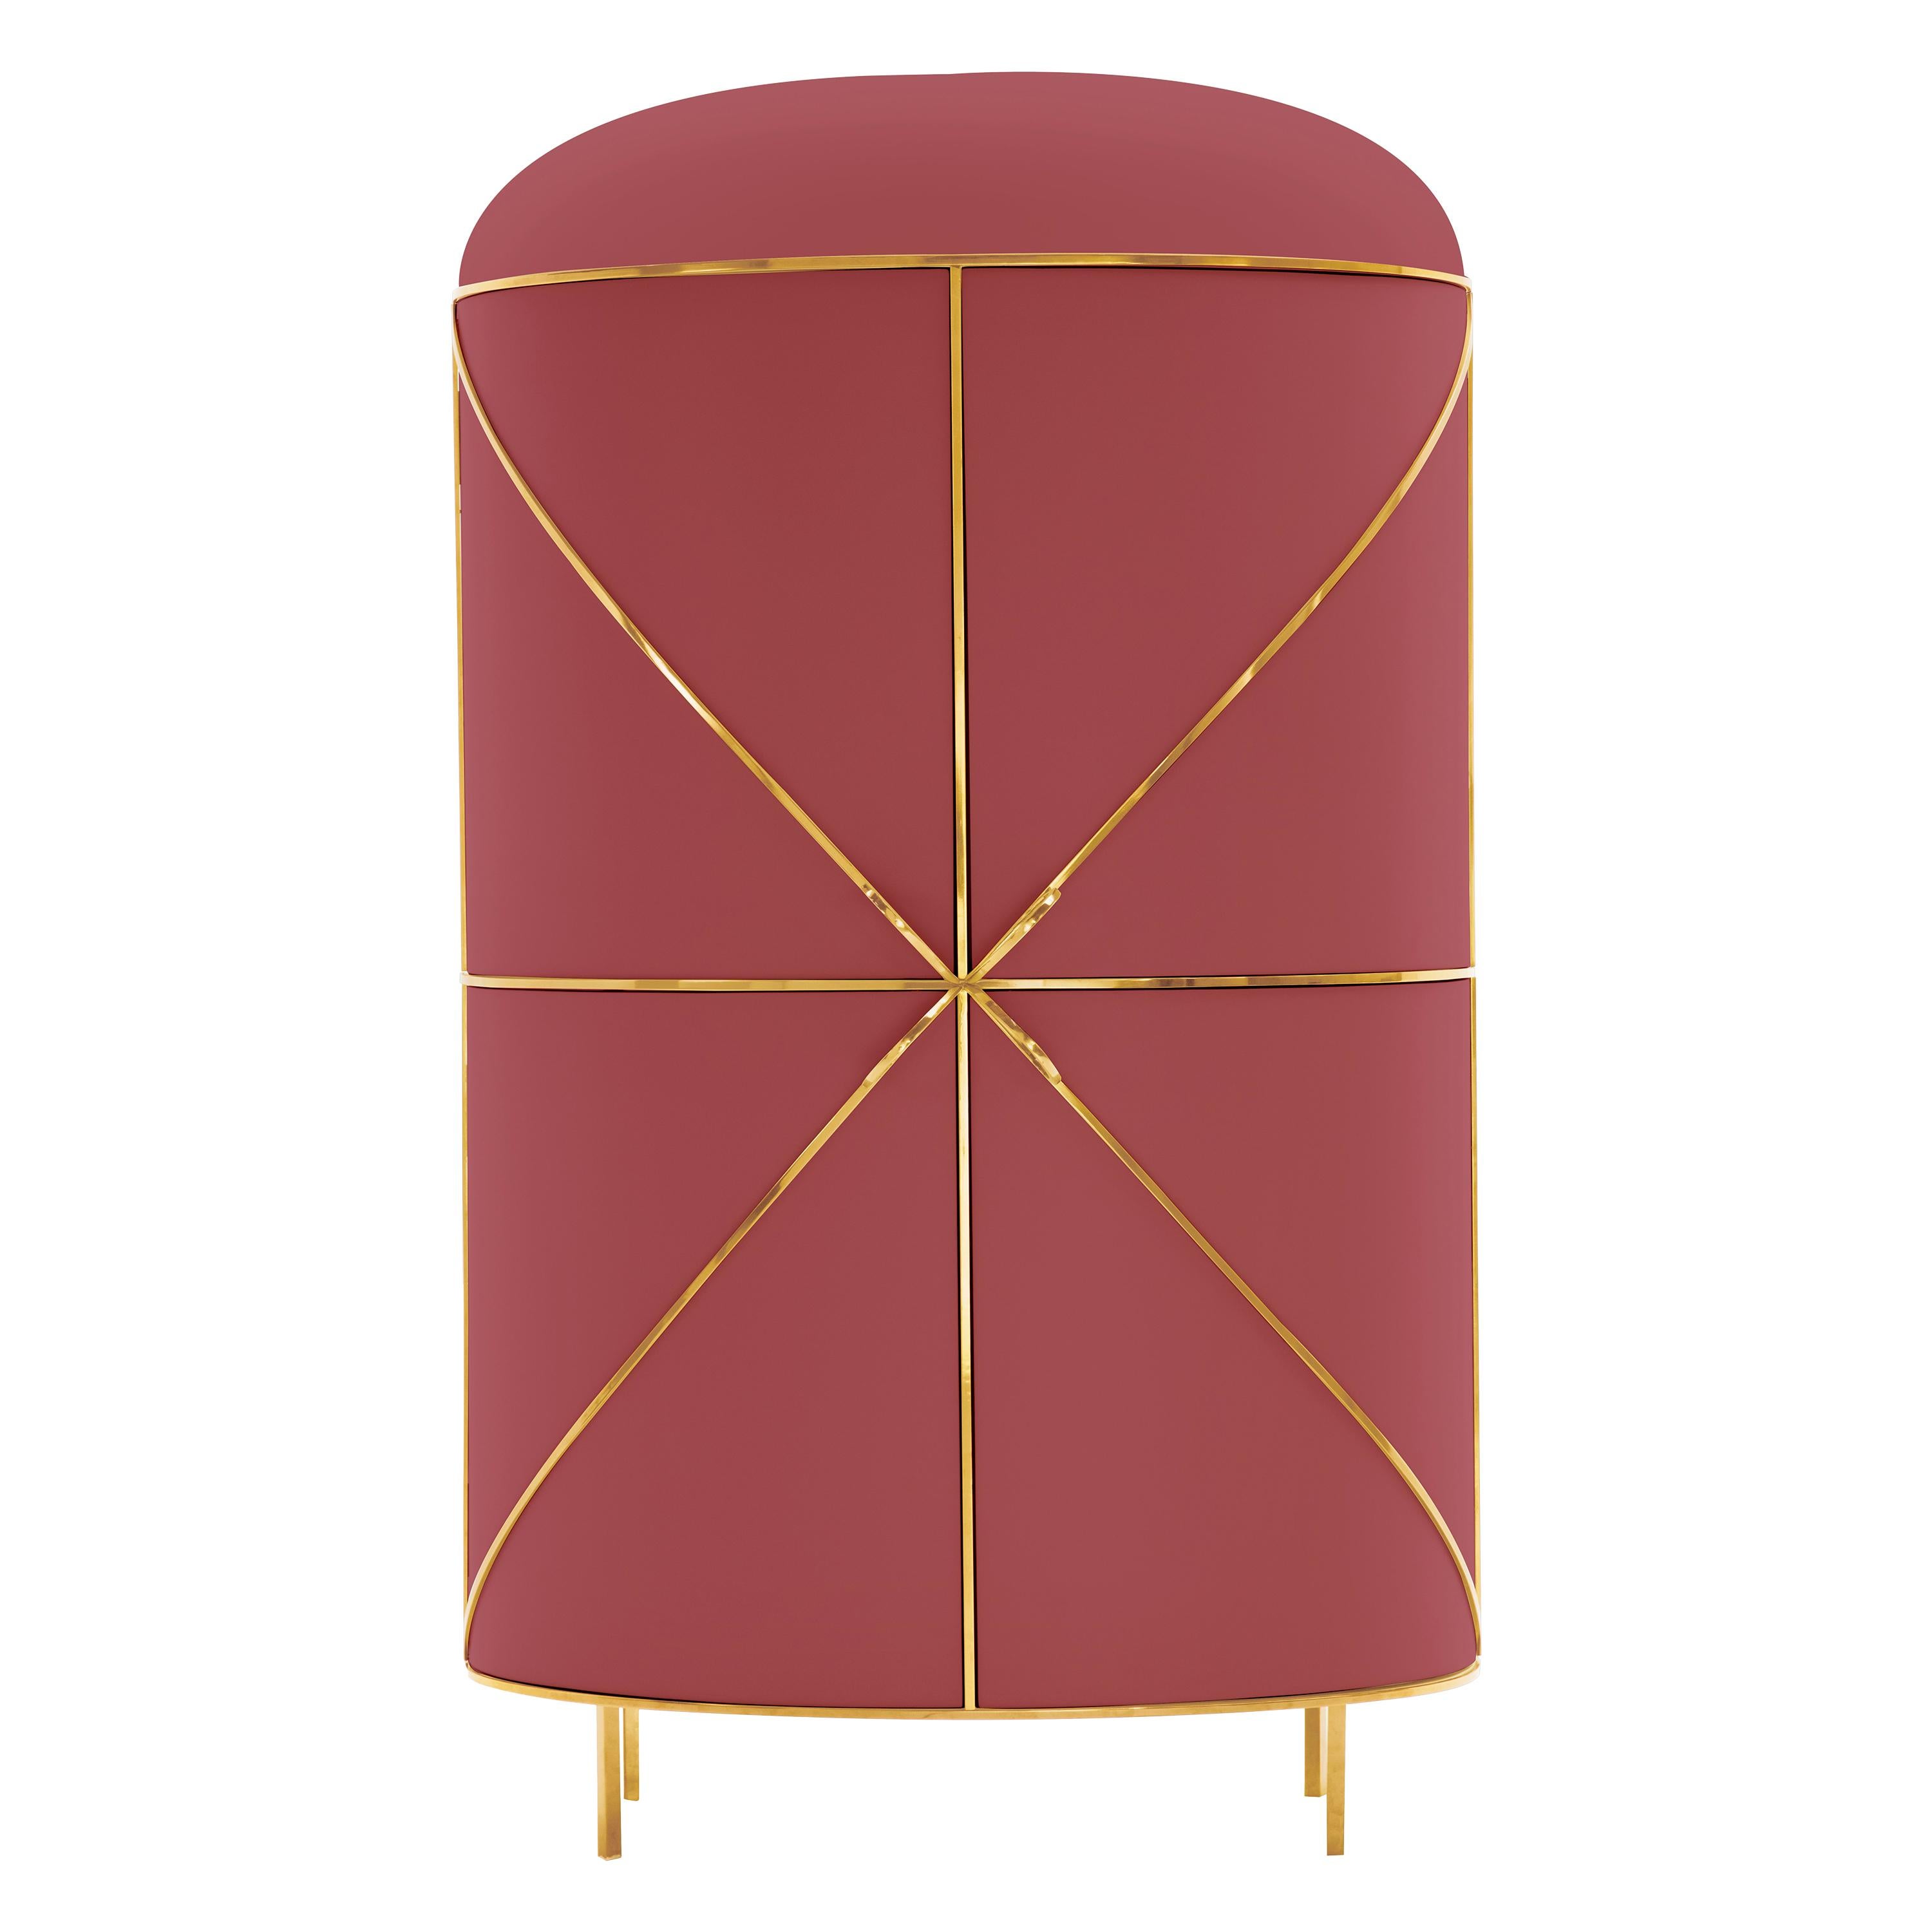 88 Secrets Rose Pink Bar Cabinet with Gold Trims by Nika Zupanc